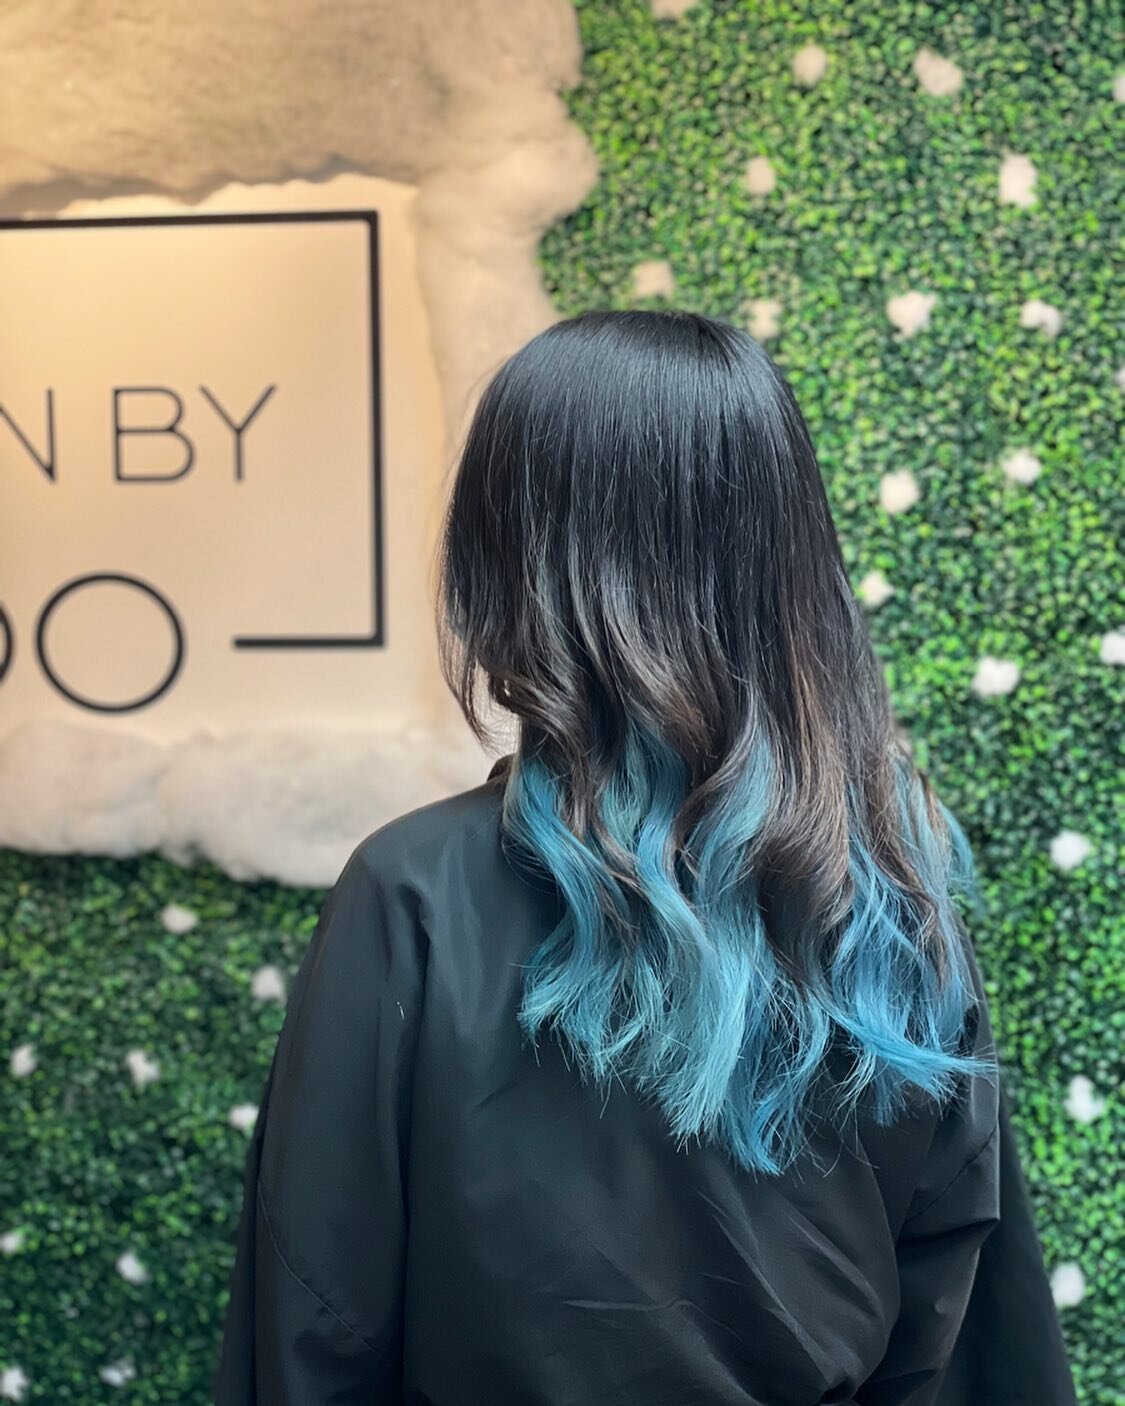 New year new color.. 🍬 
#2022 
Hair done by @cla_yoo 

#salonbyyoo #onlyou

For customer satisfaction, a 1:1 consultation will be performed before any service.

For appointment/consultation
DM / call at 8089551600
Email info@salonbyyoo.com
Www.salon